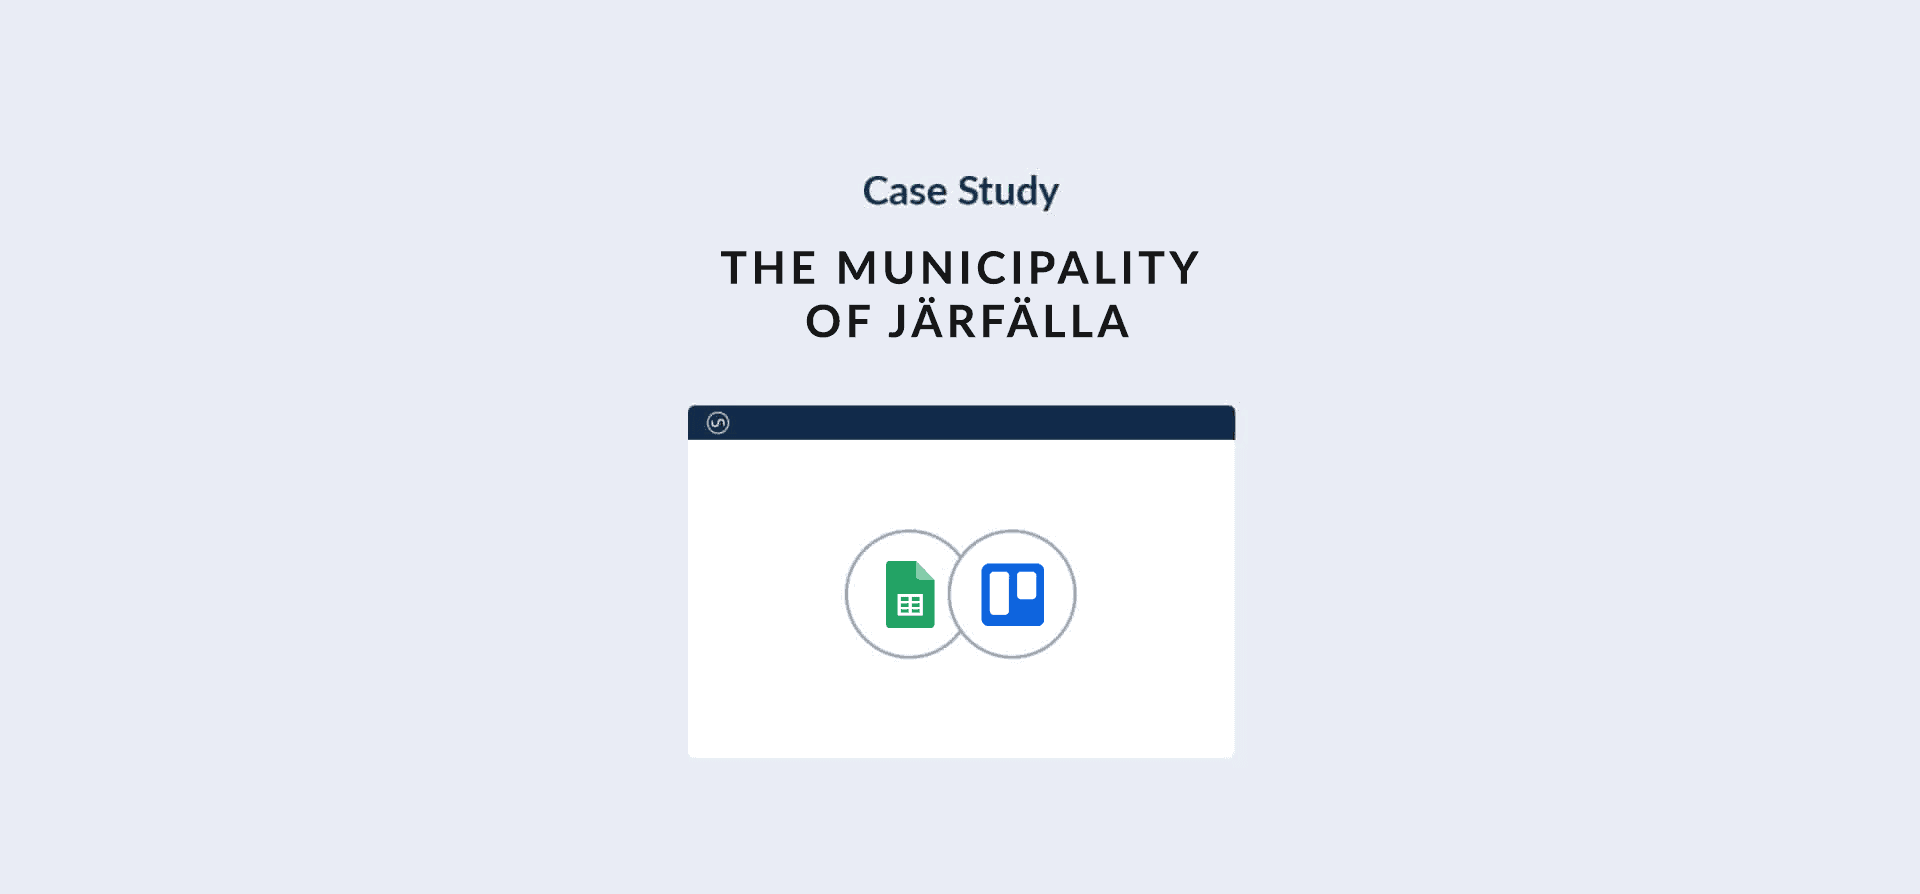 Logos for google sheets, Trello, and the municipality of Jarfalla, representing the case study.